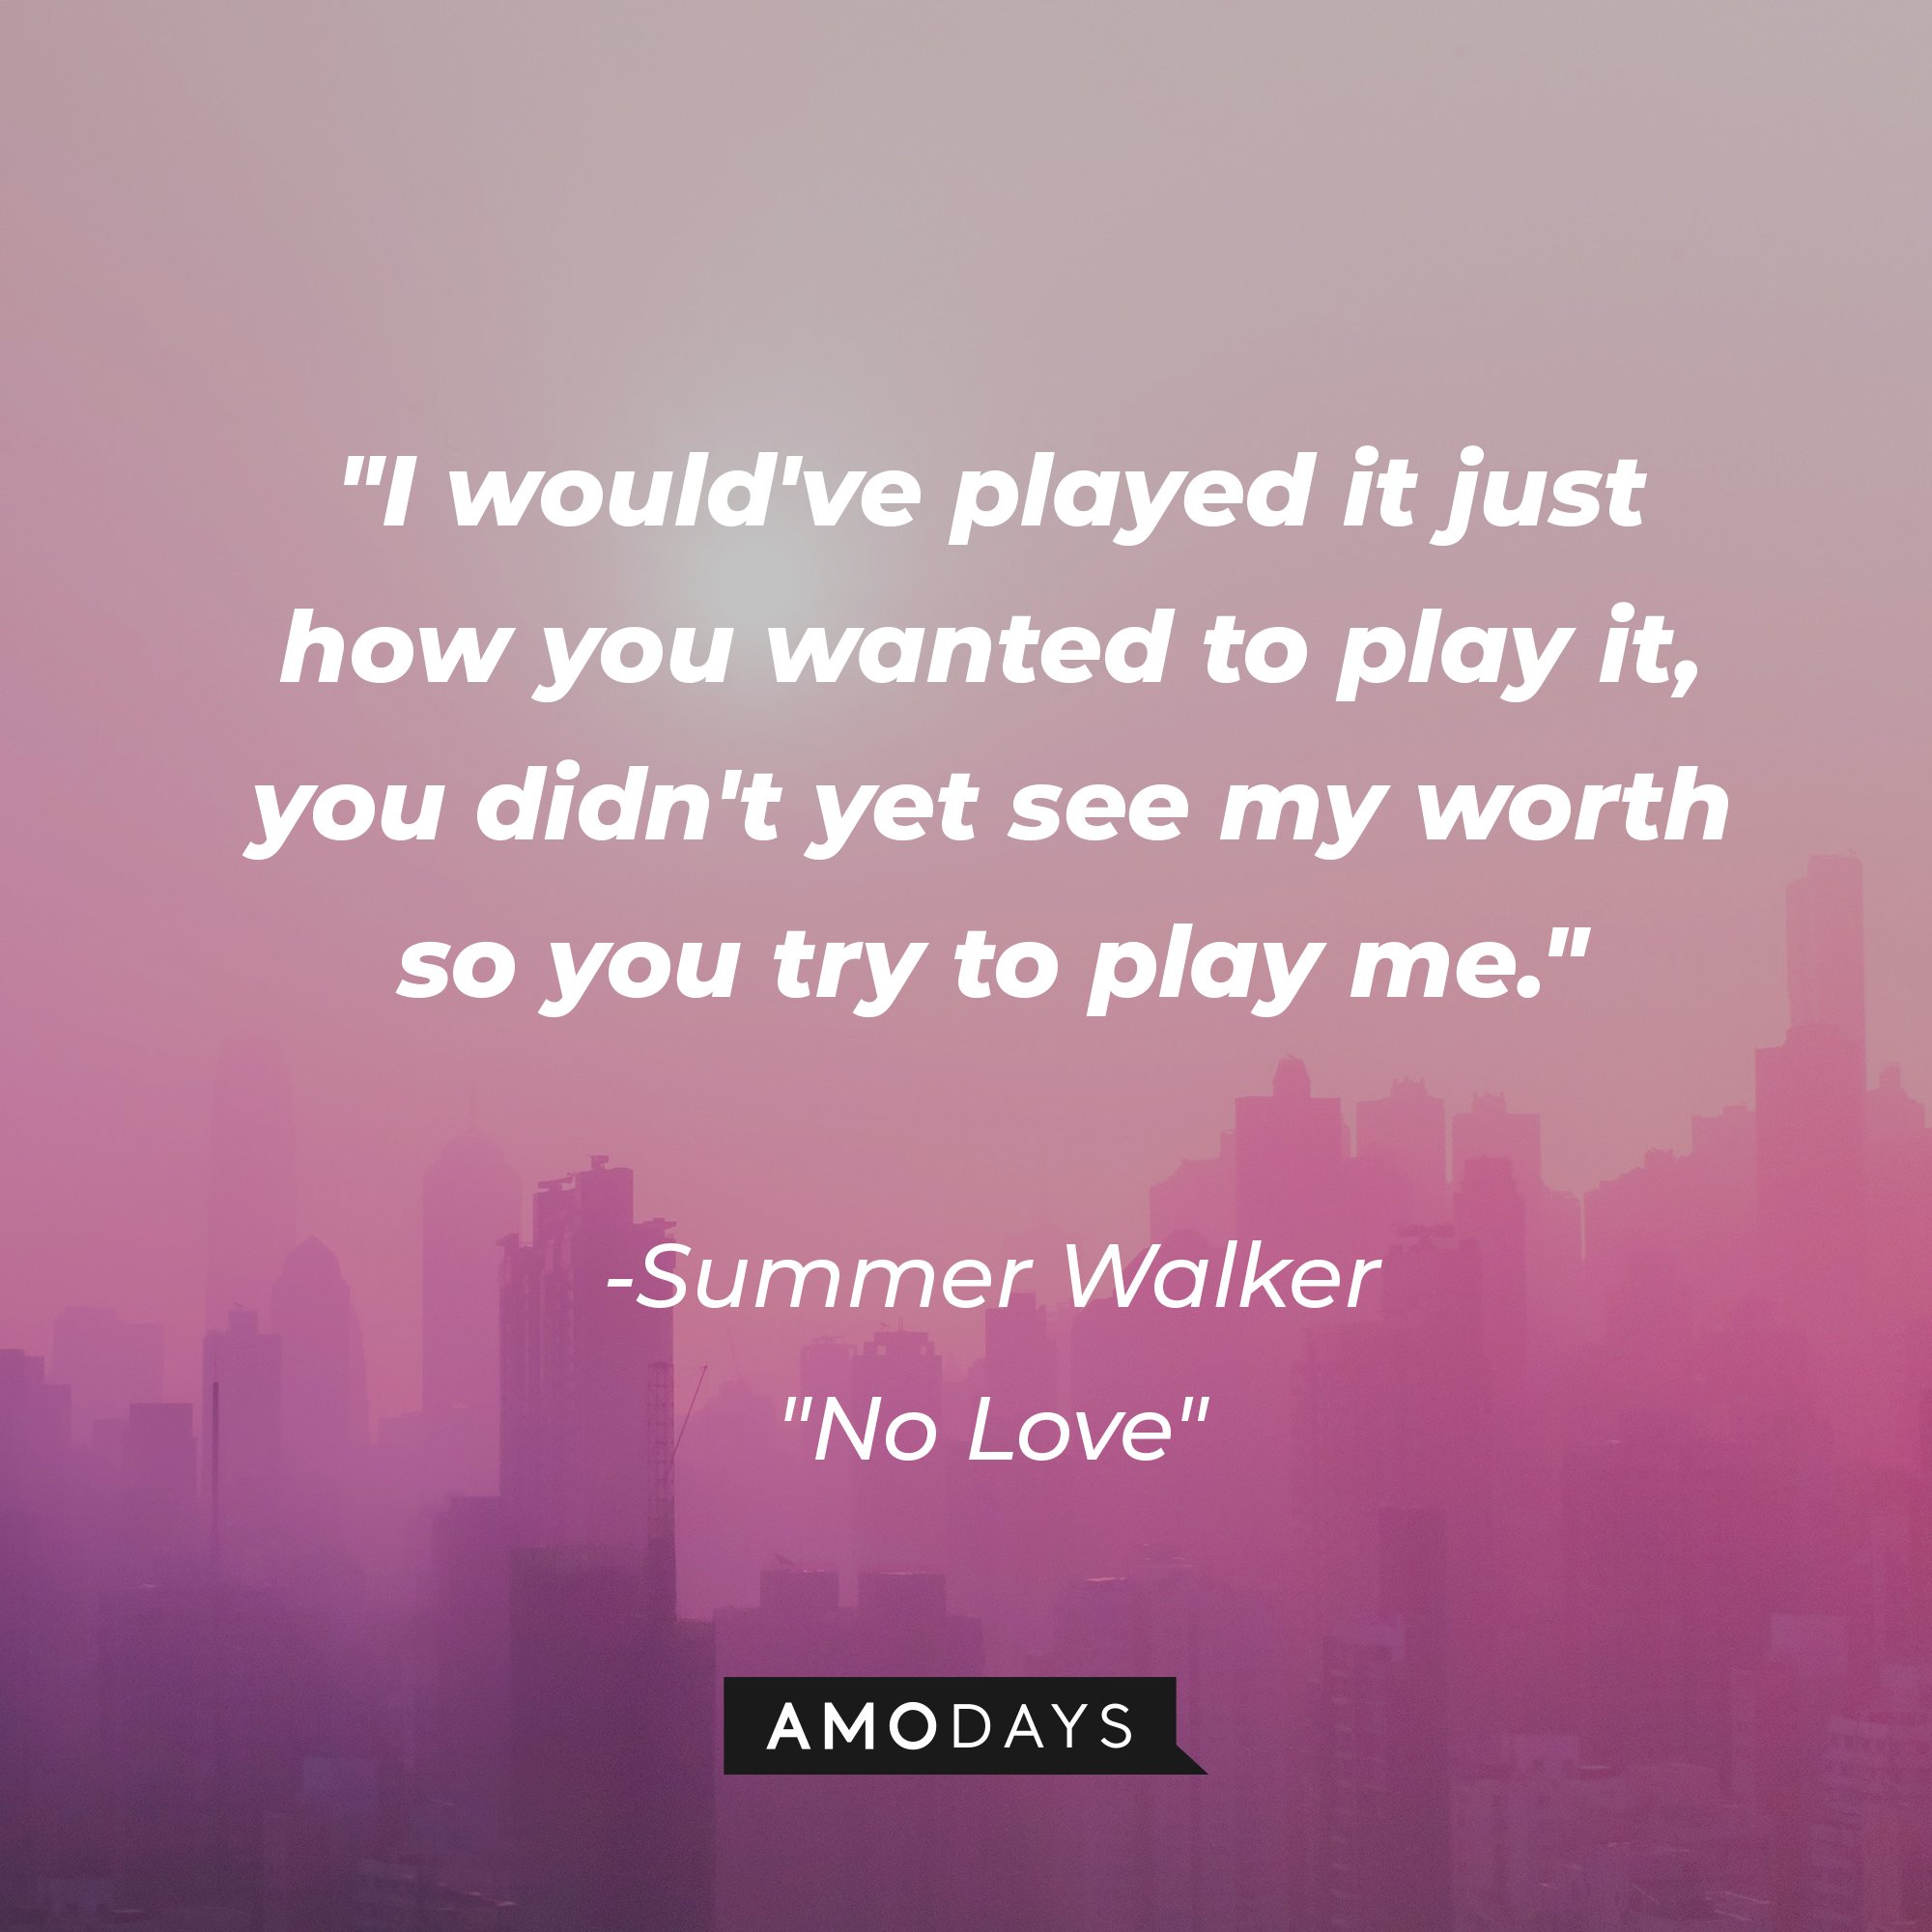 Summer Walker's "No Love" quote: "I would've played it just how you wanted to play it, you didn't yet see my worth so you try to play me." | Image: AmoDays